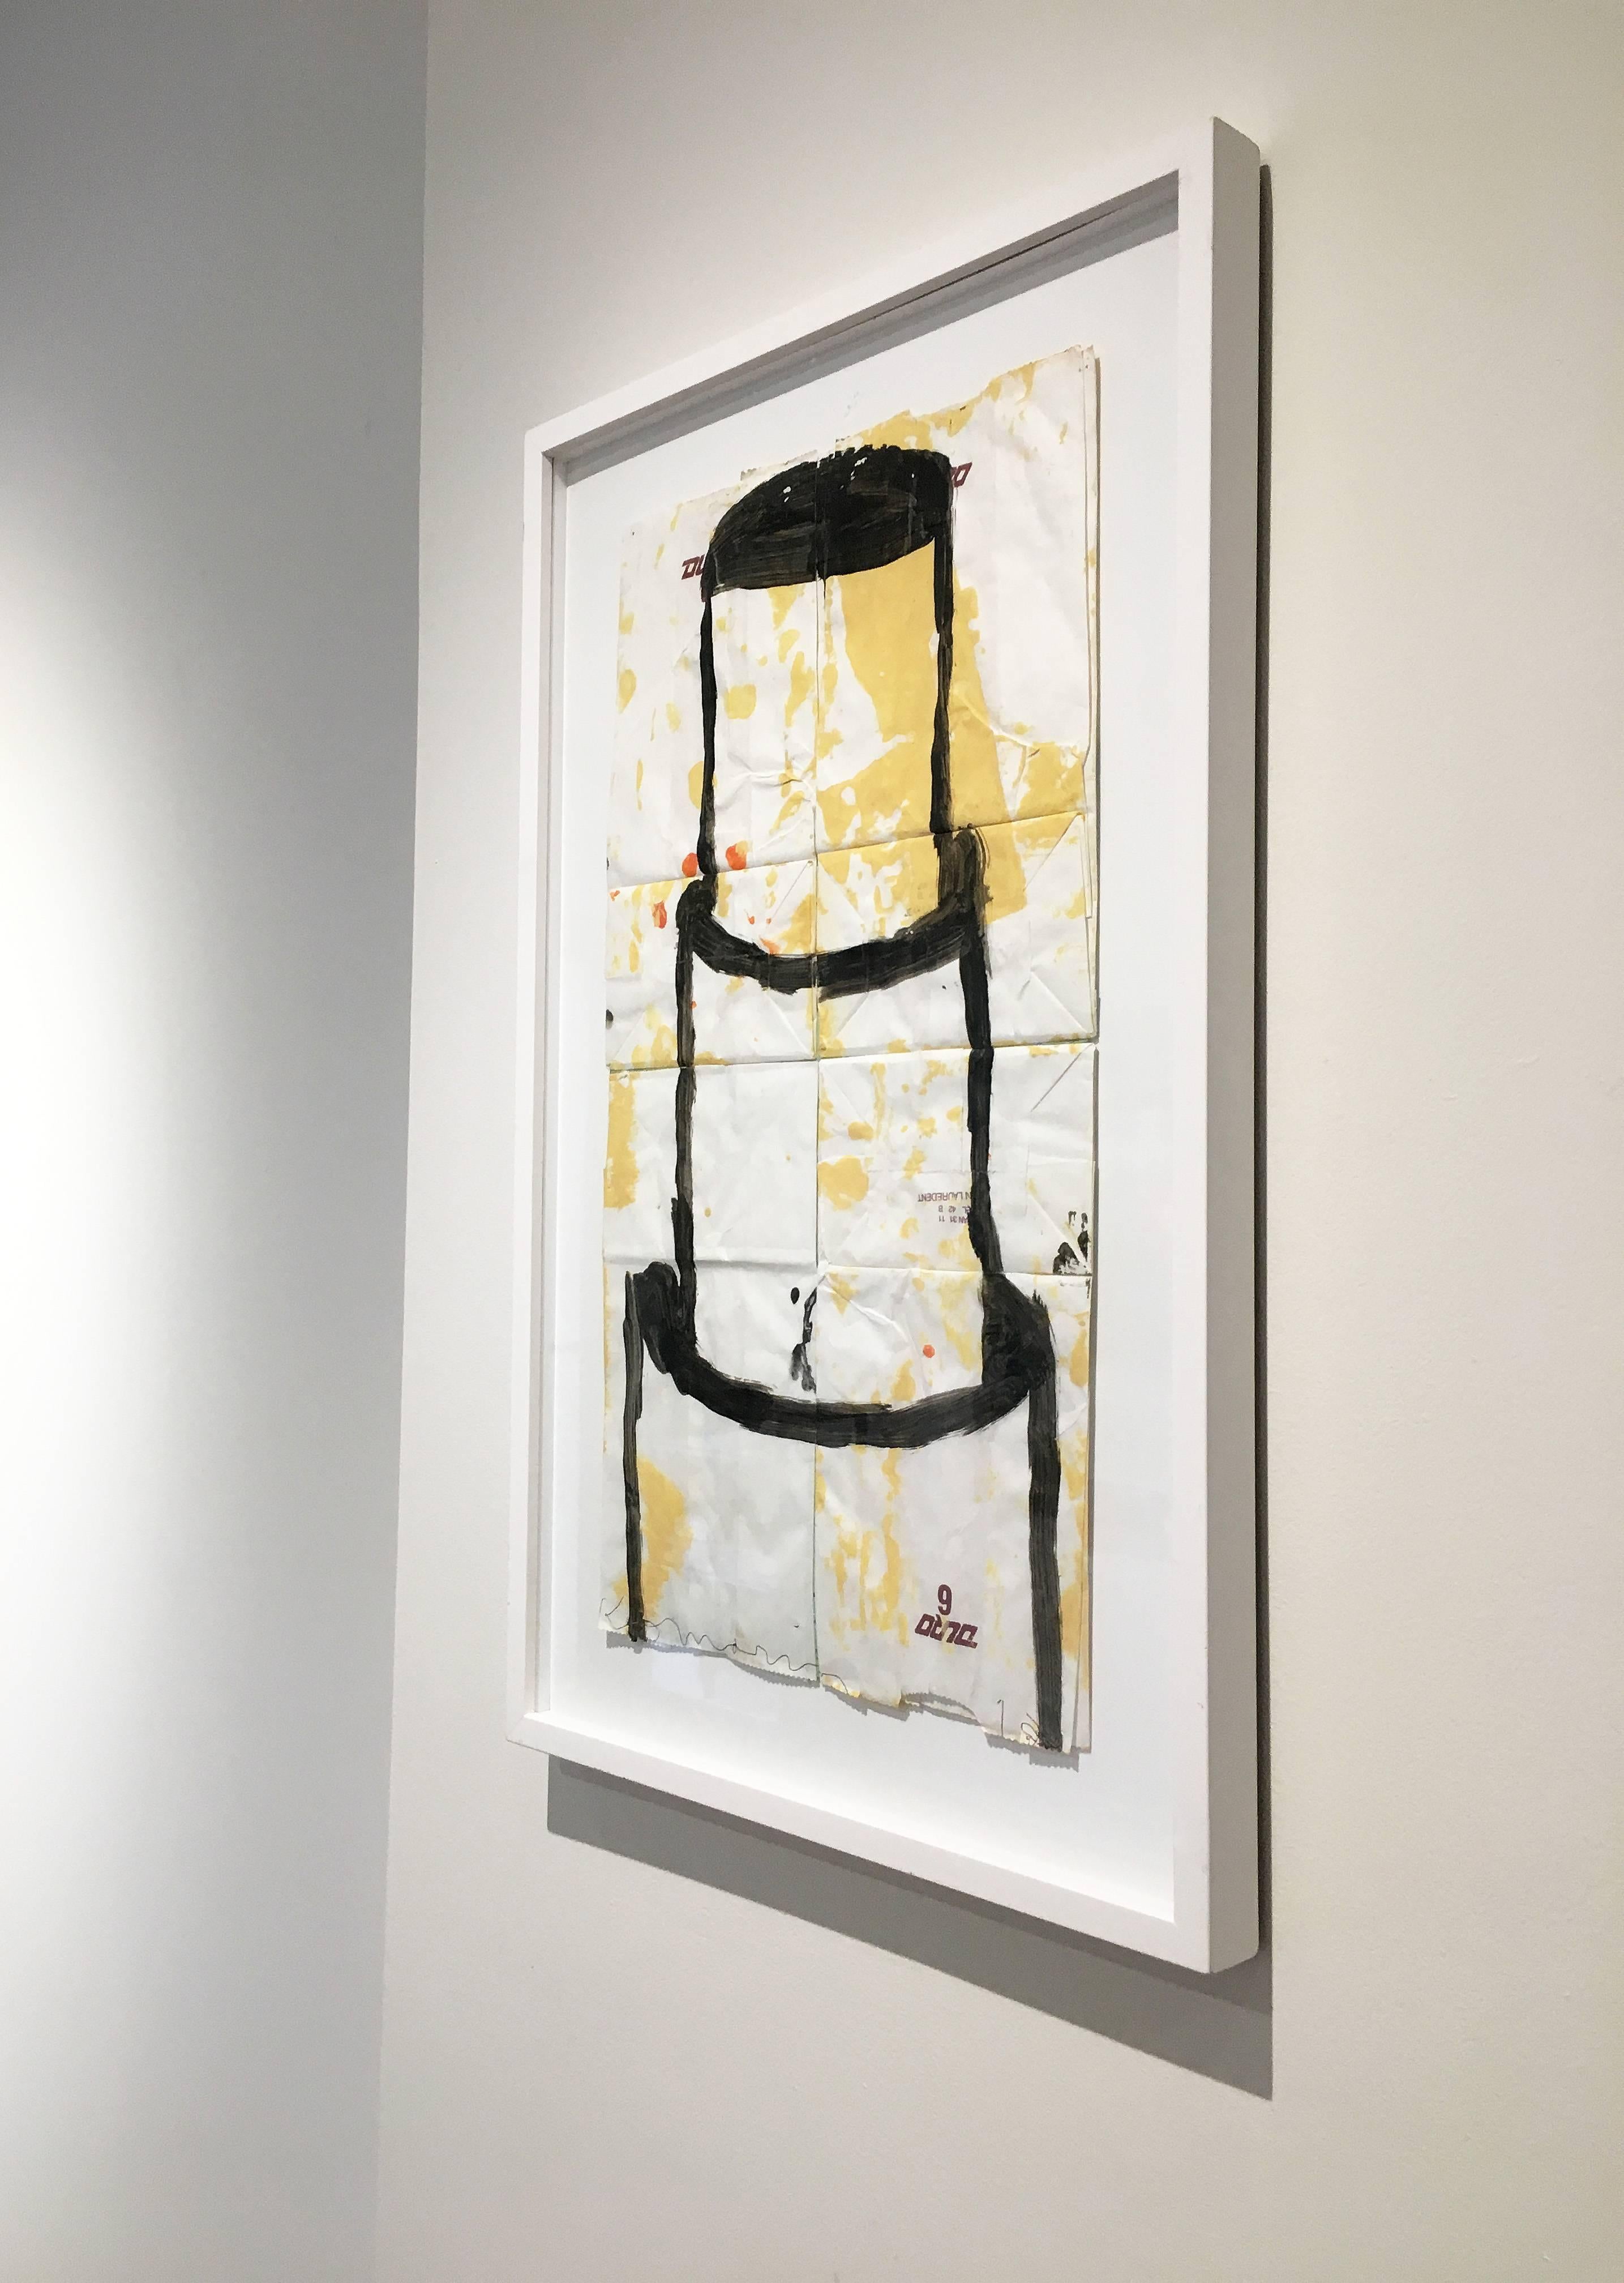 Cake 3 by contemporary artist, Gary Komarin, 2014. Acrylic on paper bags, 22 x 12 inches.  it is framed, and the framed size is 27.5 x 17 inches.  The faux naive style painting of a three tier cake is outlined in black with yellow and red splotches